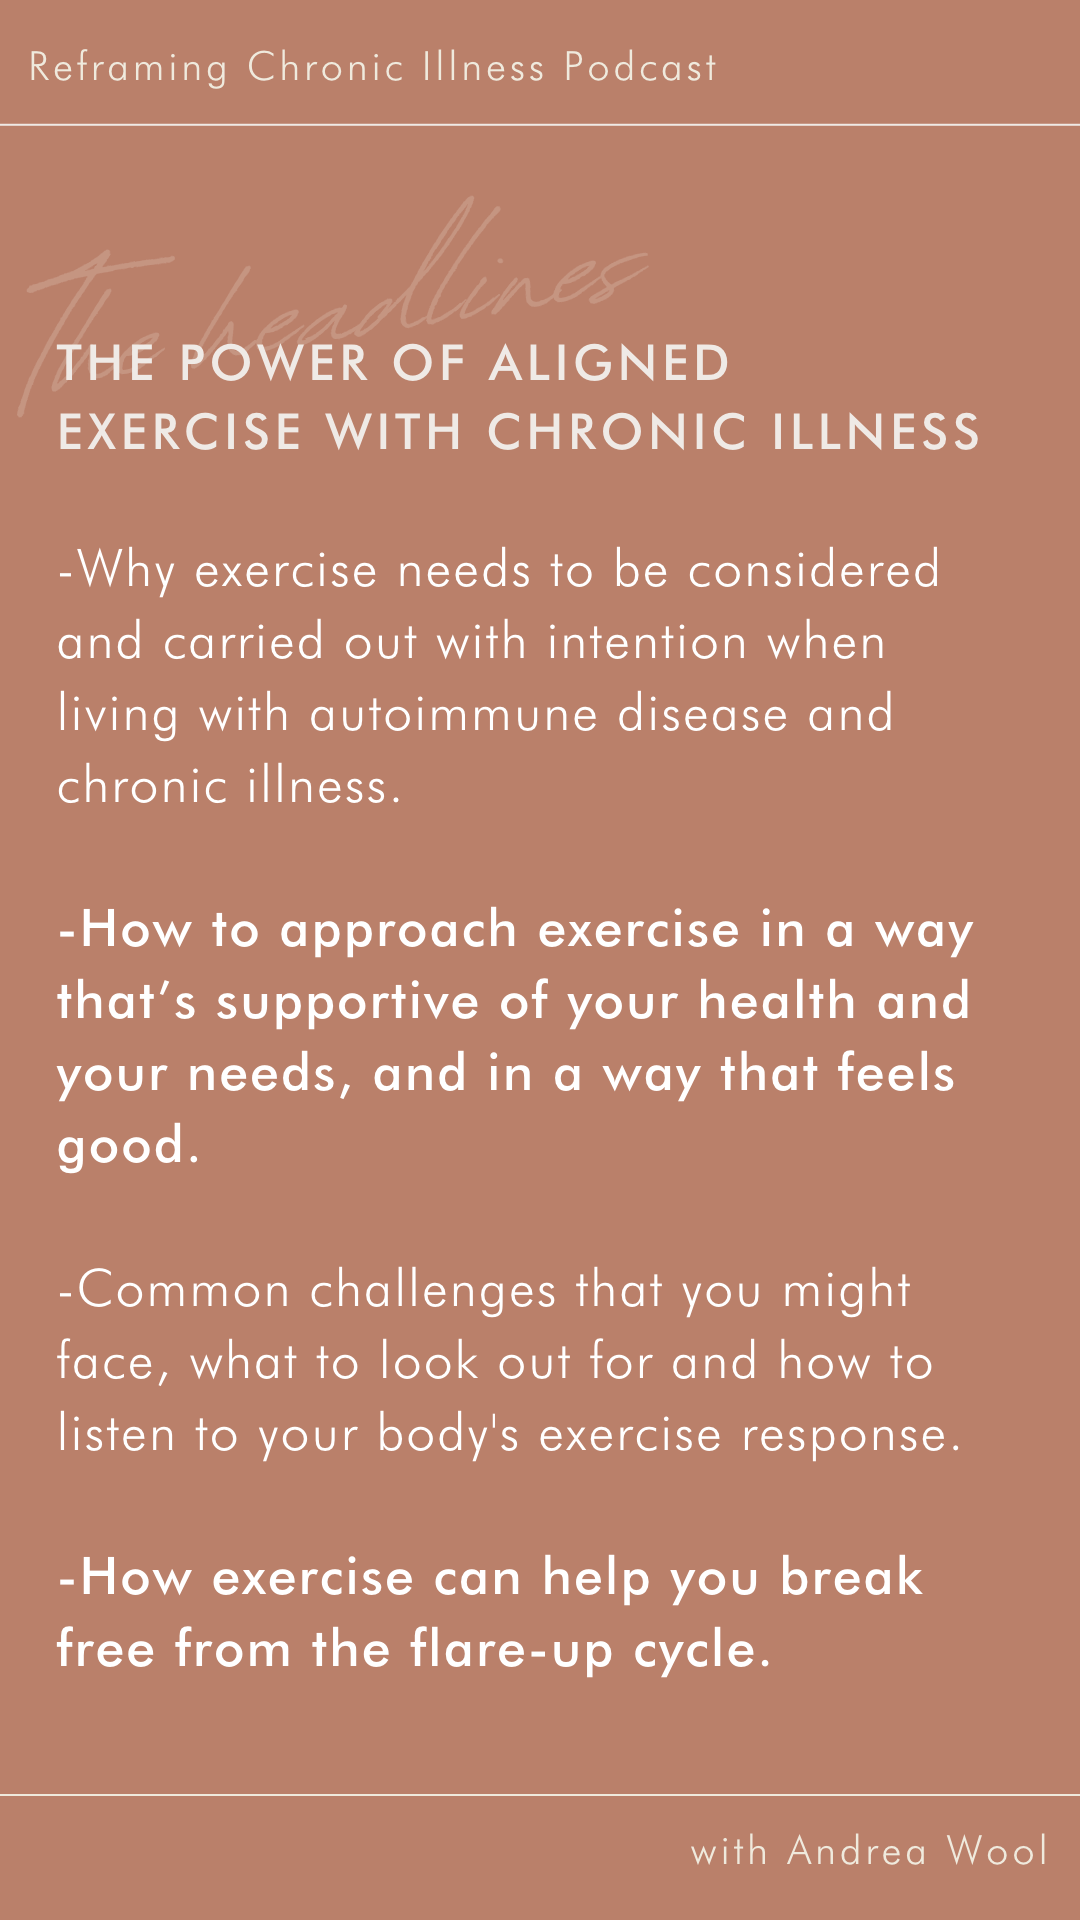 Andrea Wool Autoimmune Strong - Alana Holloway Chronic Illness Coach - Reframing Chronic Illness Podcast - The Power of Aligned Exercise3.png